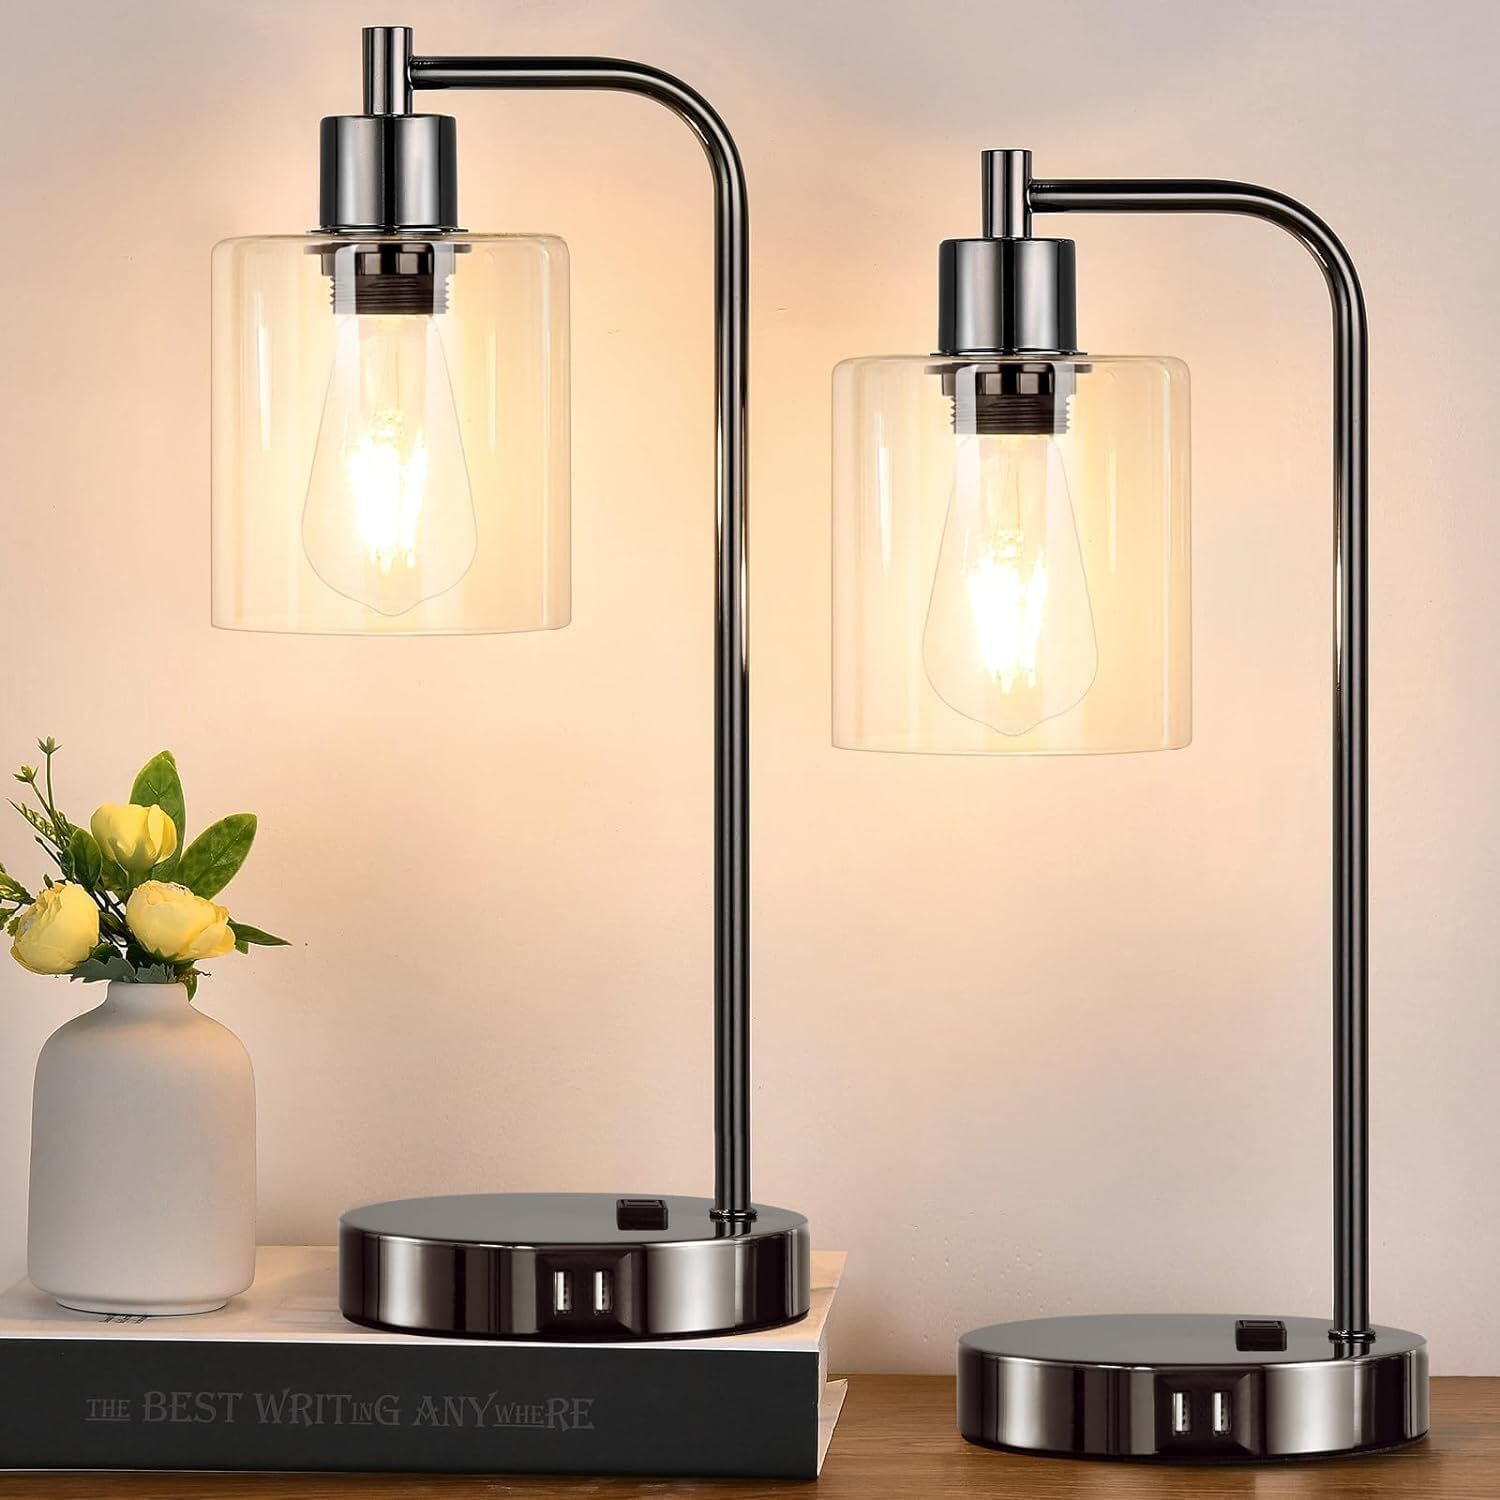 Industrial Touch Control Table Lamps Set of 2 - Black Nickel 